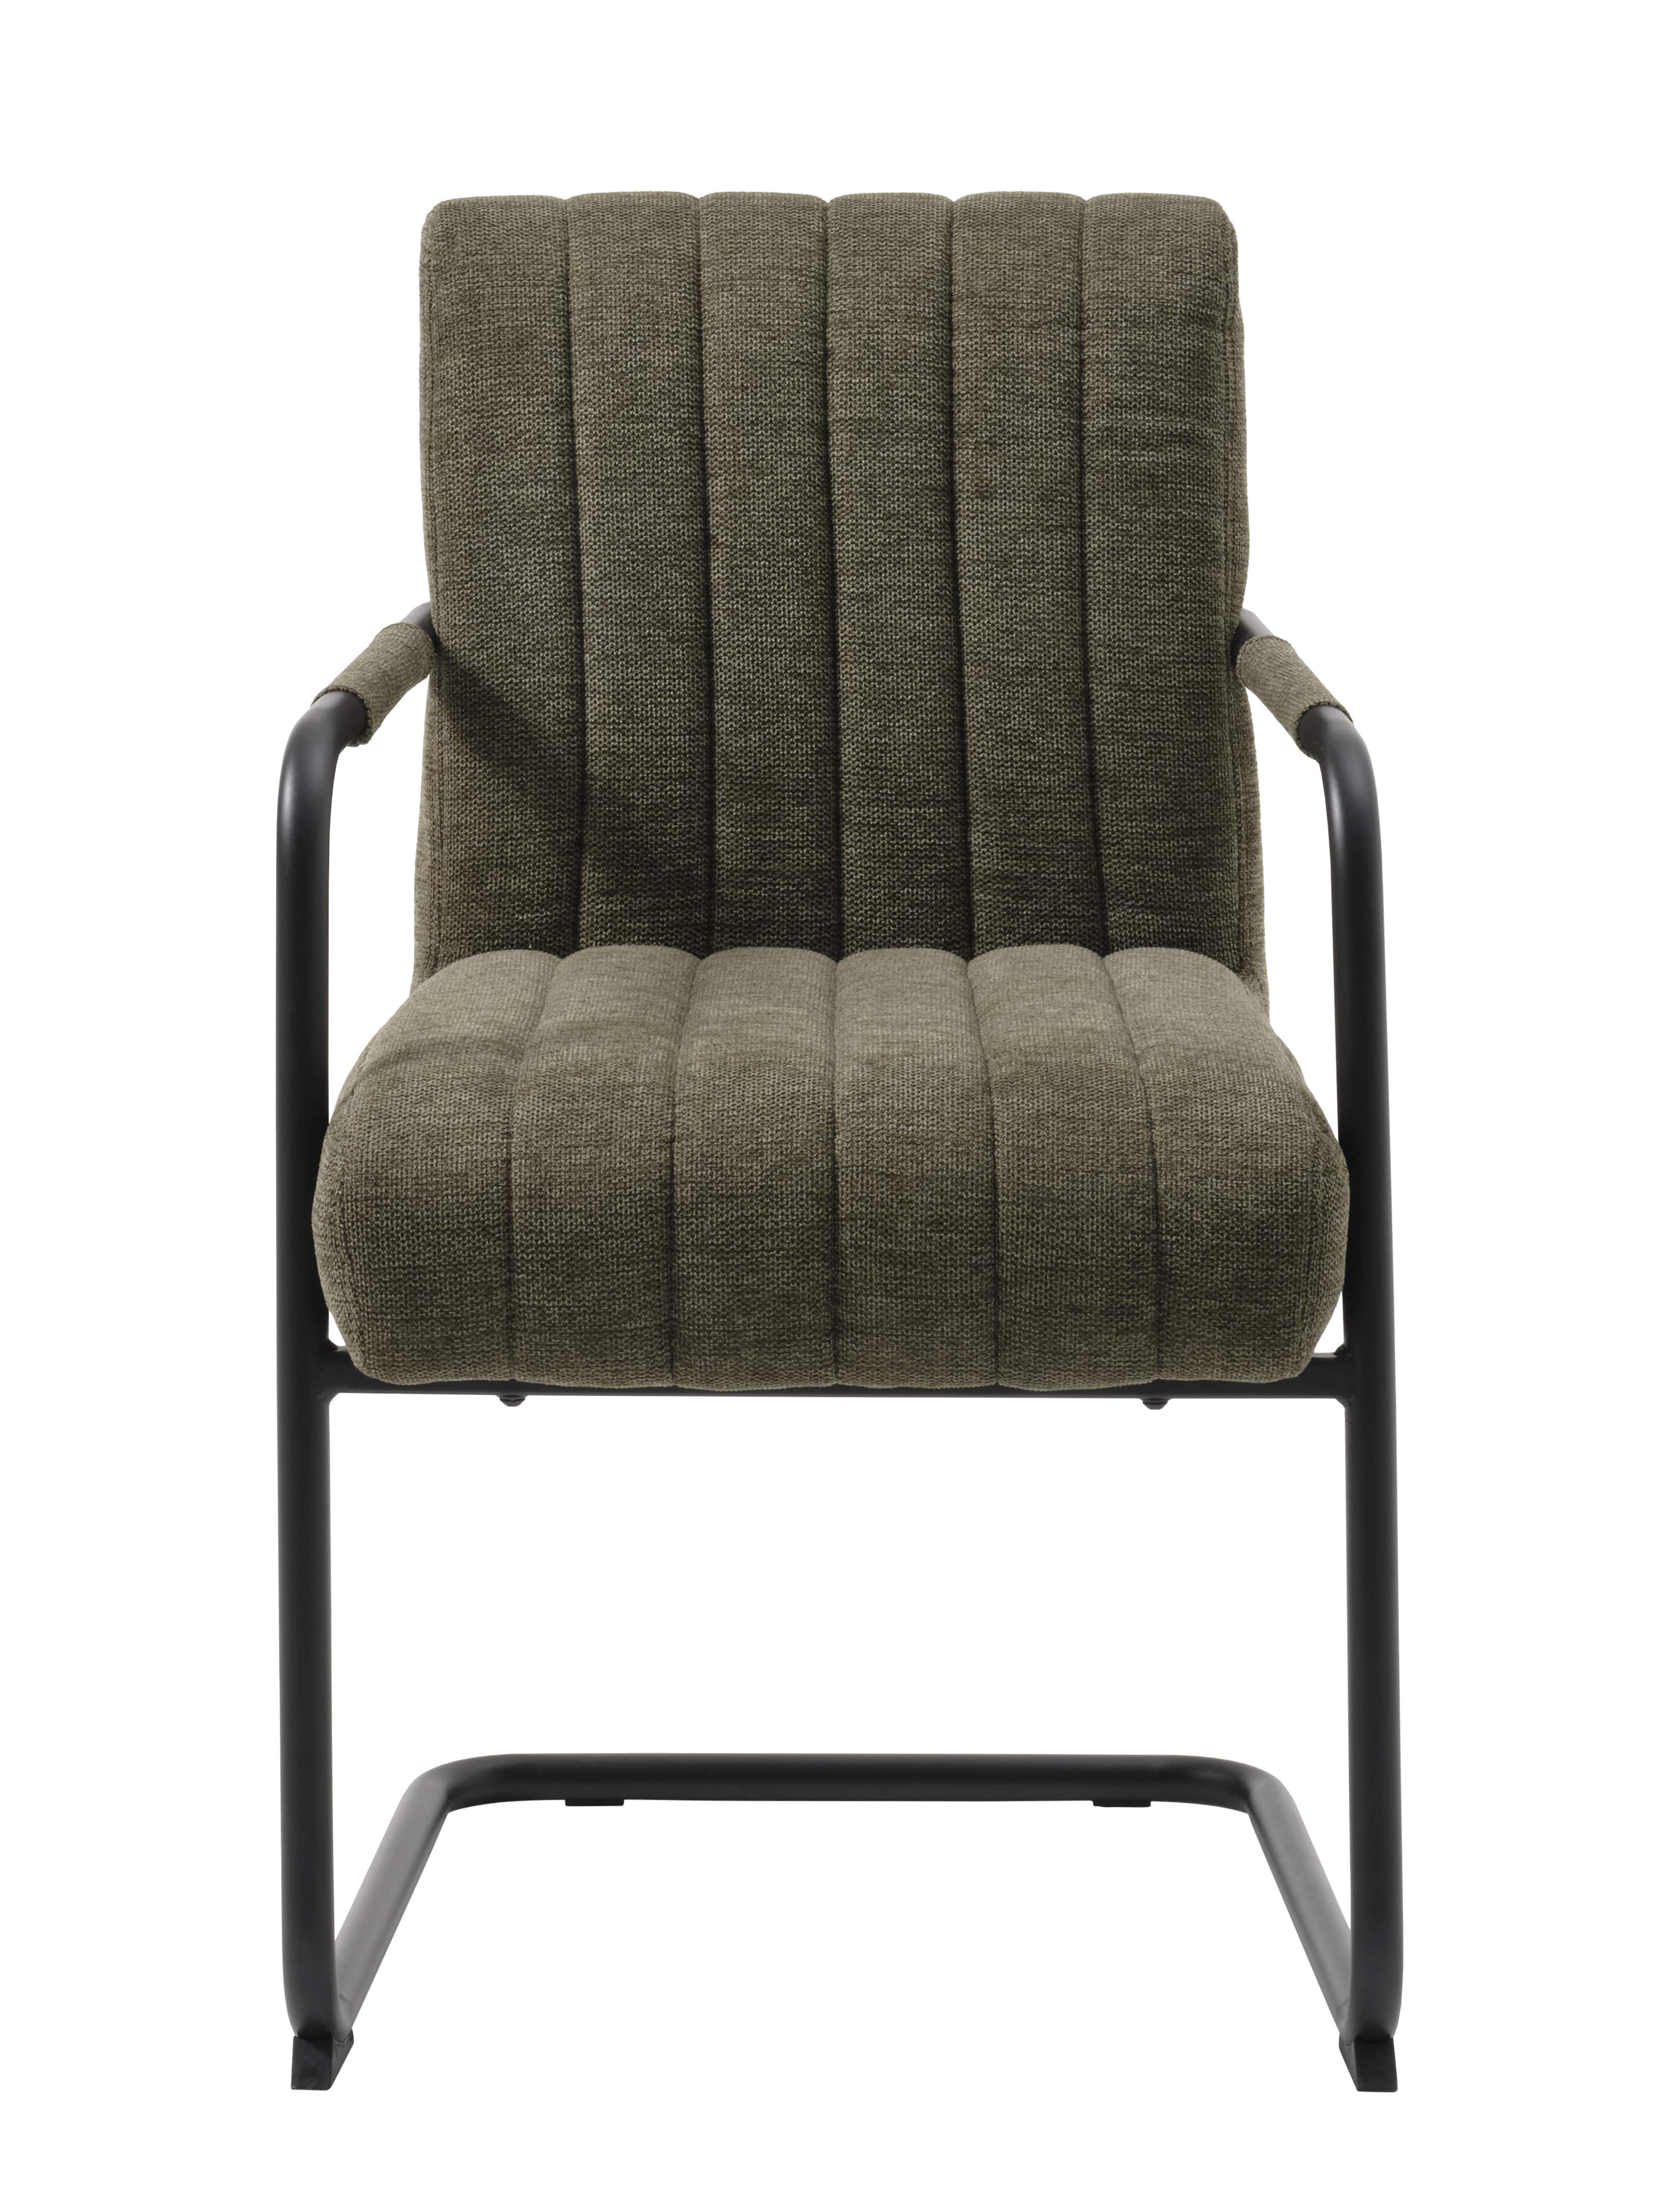 49490003 TROUT CHAIR OLIVE GREEN_3-min.jpg